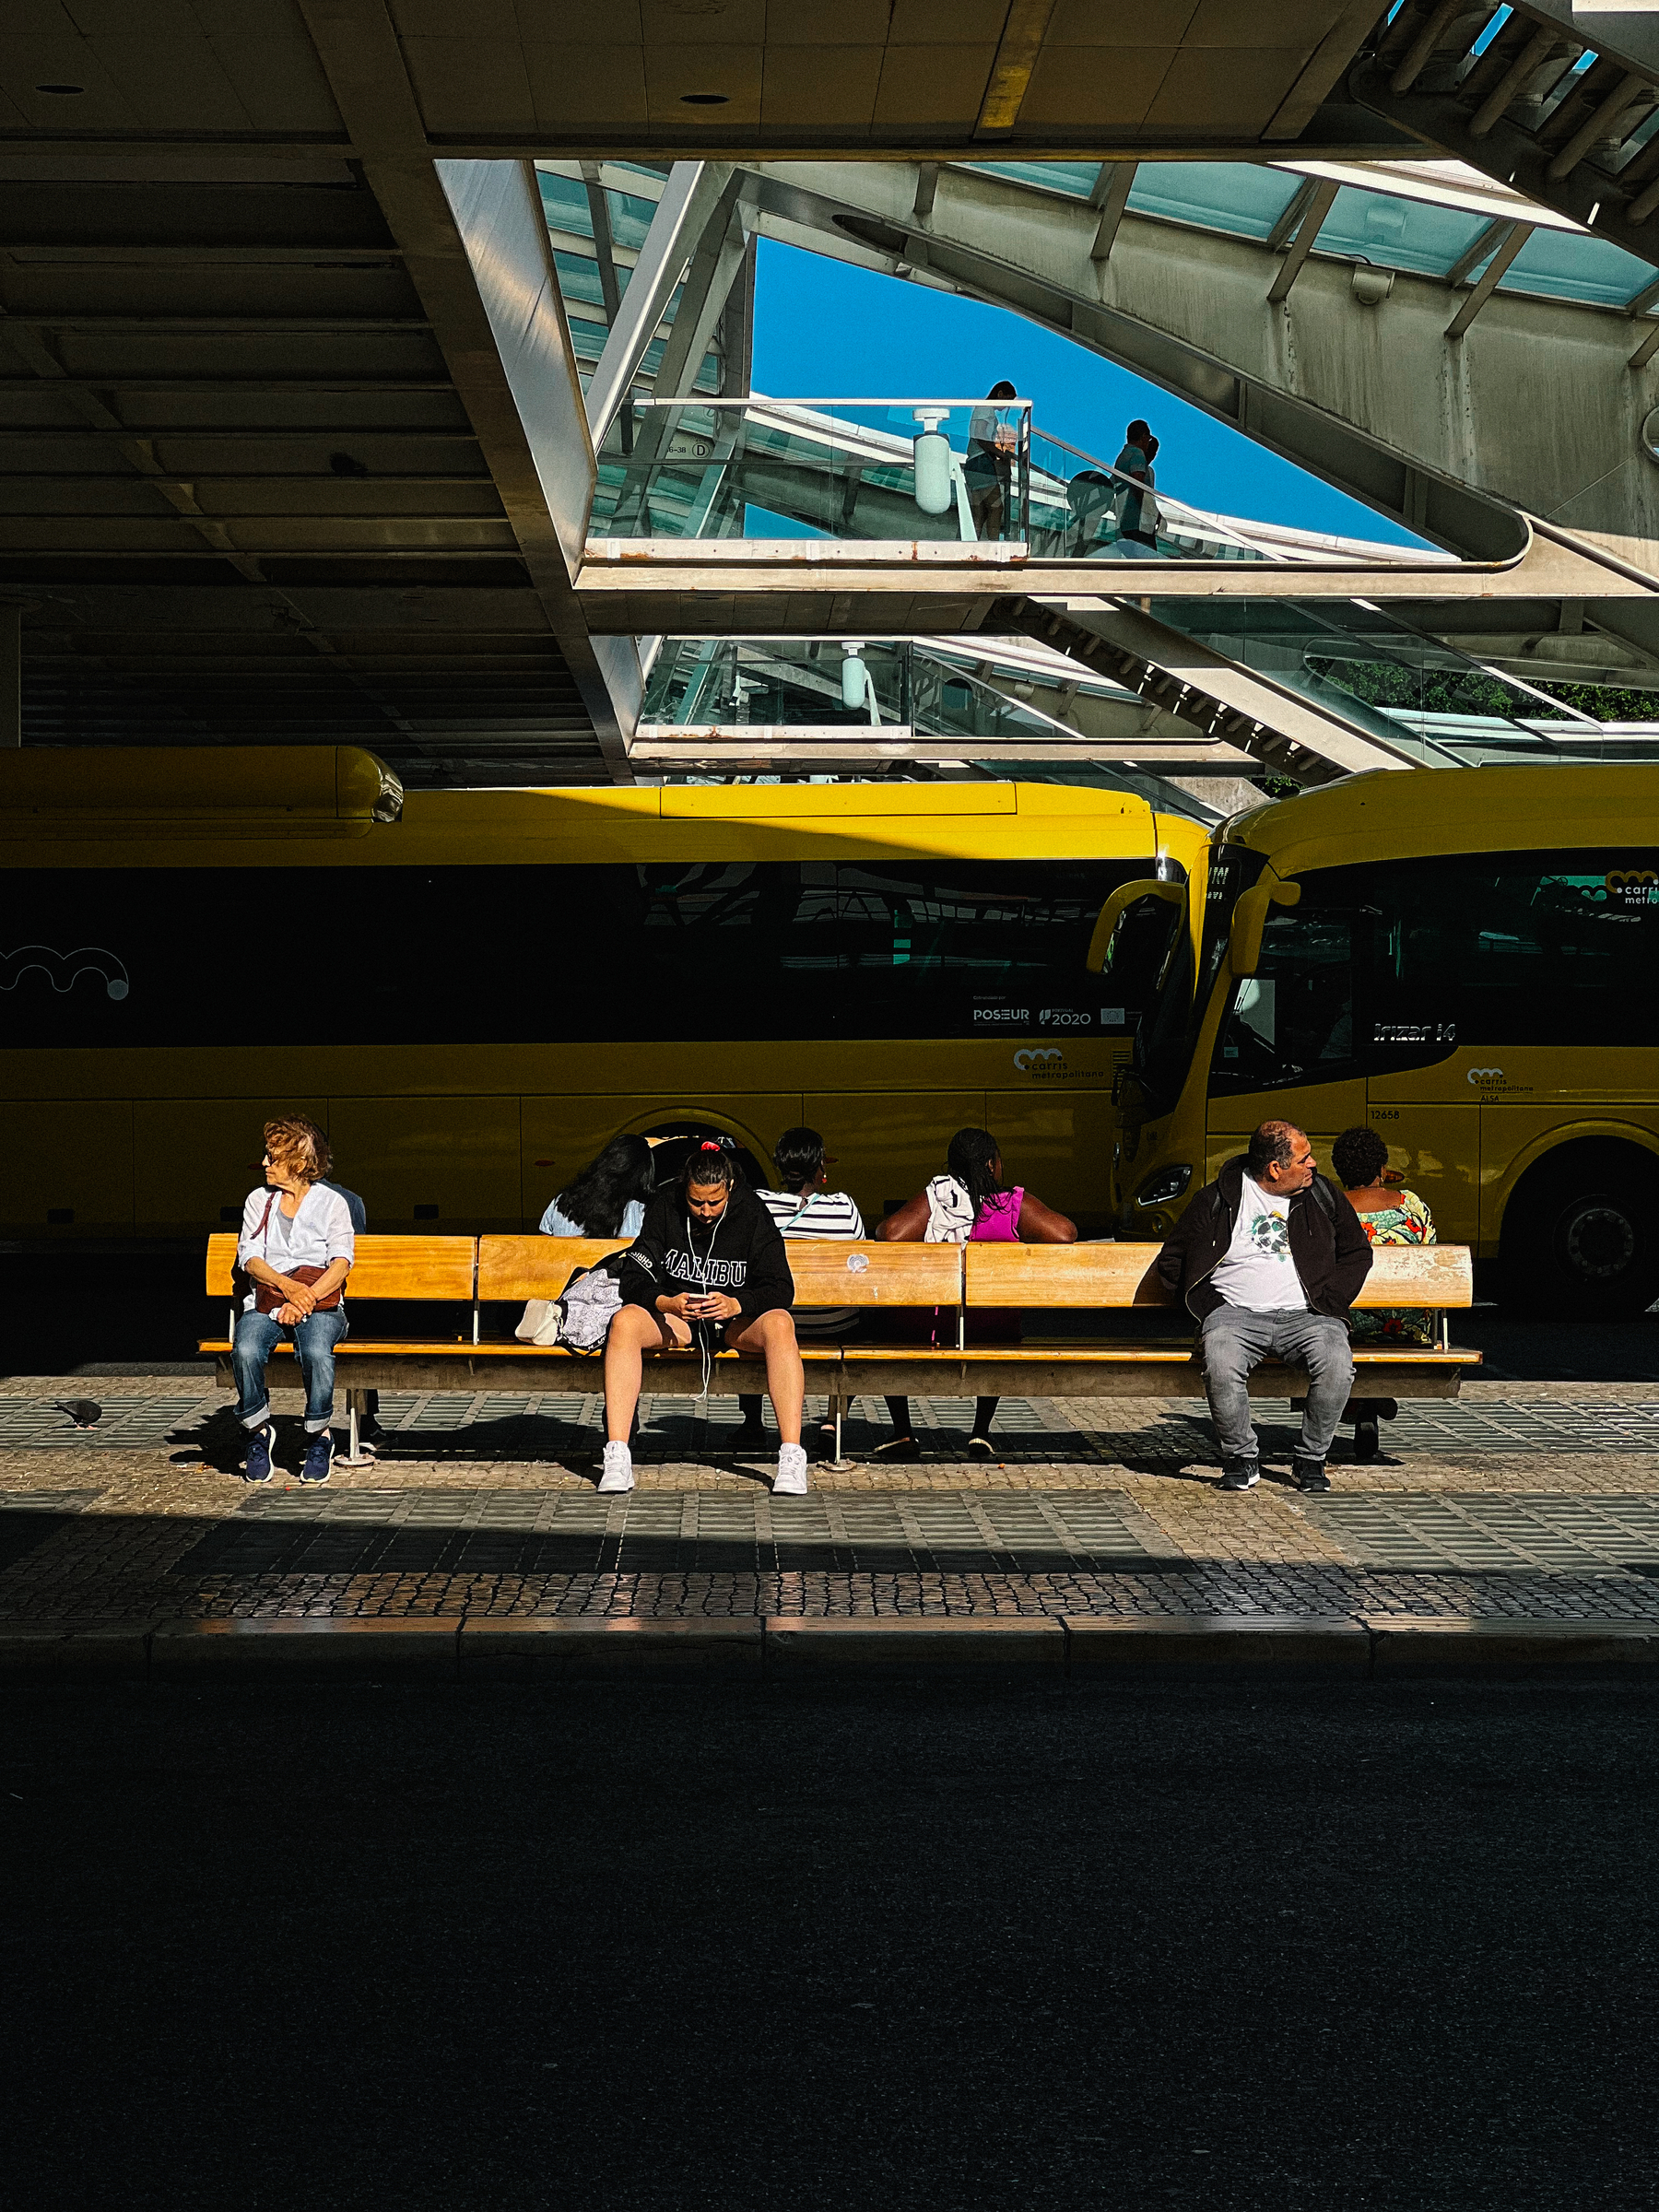 People sitting, waiting for a bus. Buses in the background. 